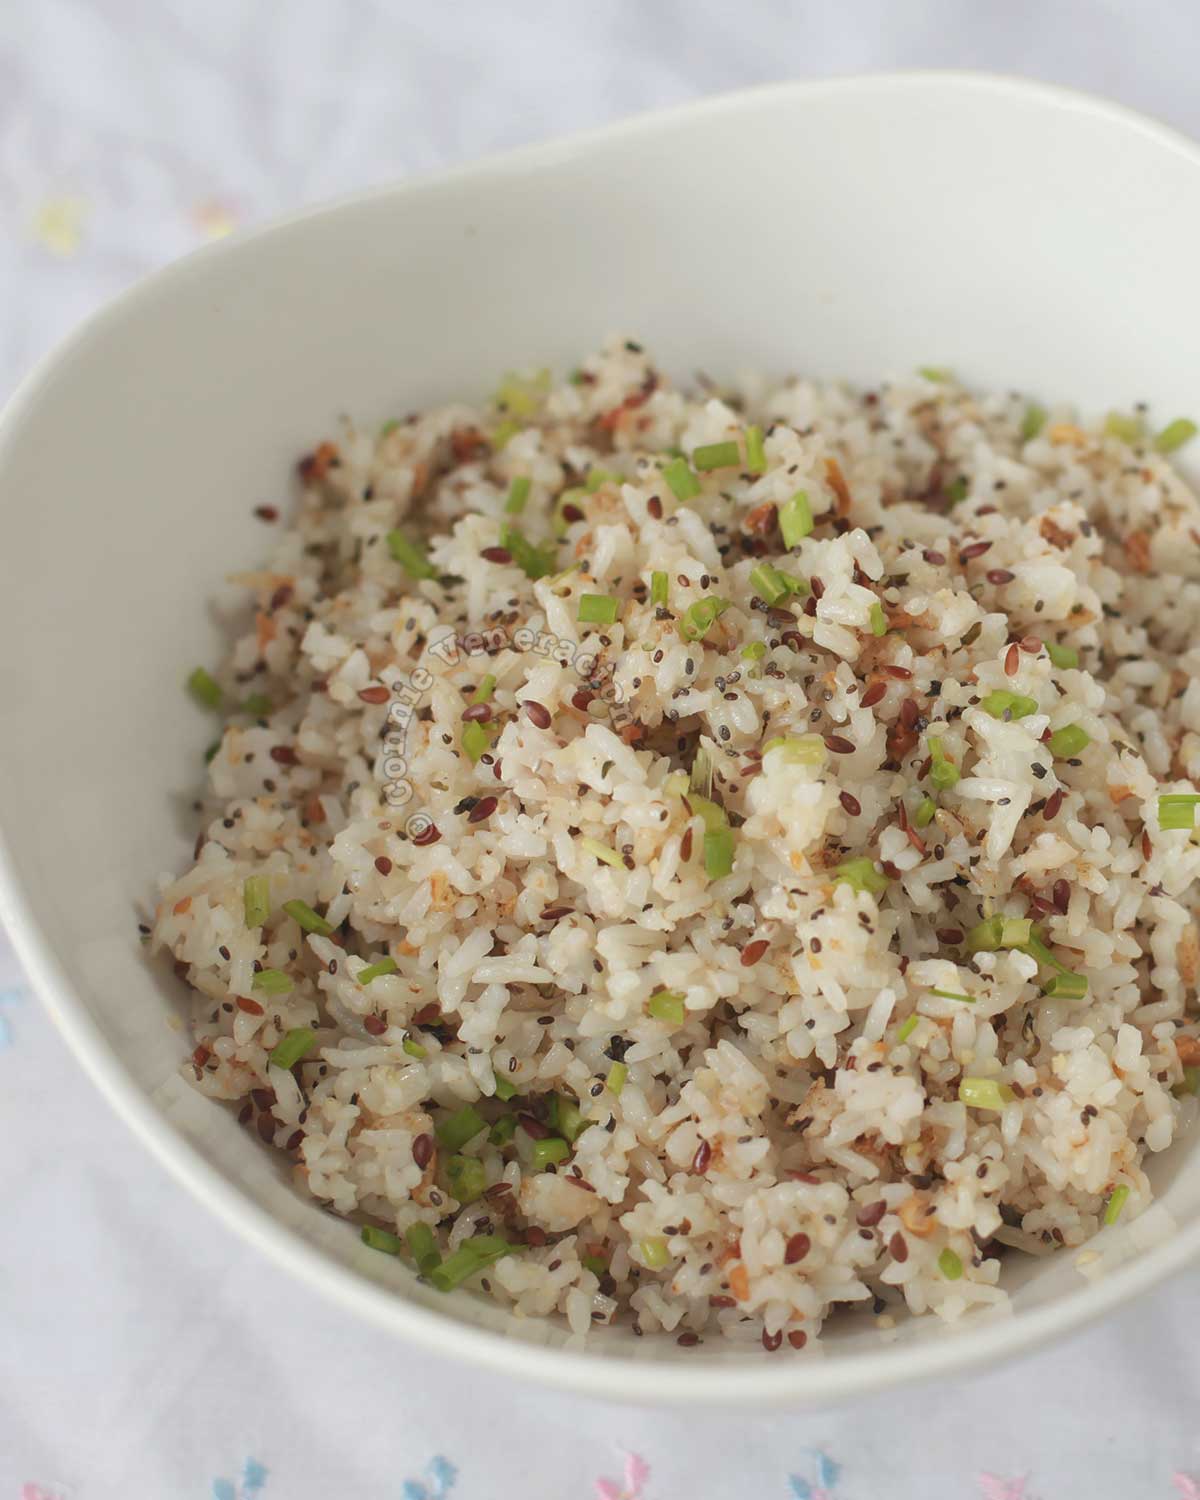 Fried rice with herbs and seeds in white serving bowl